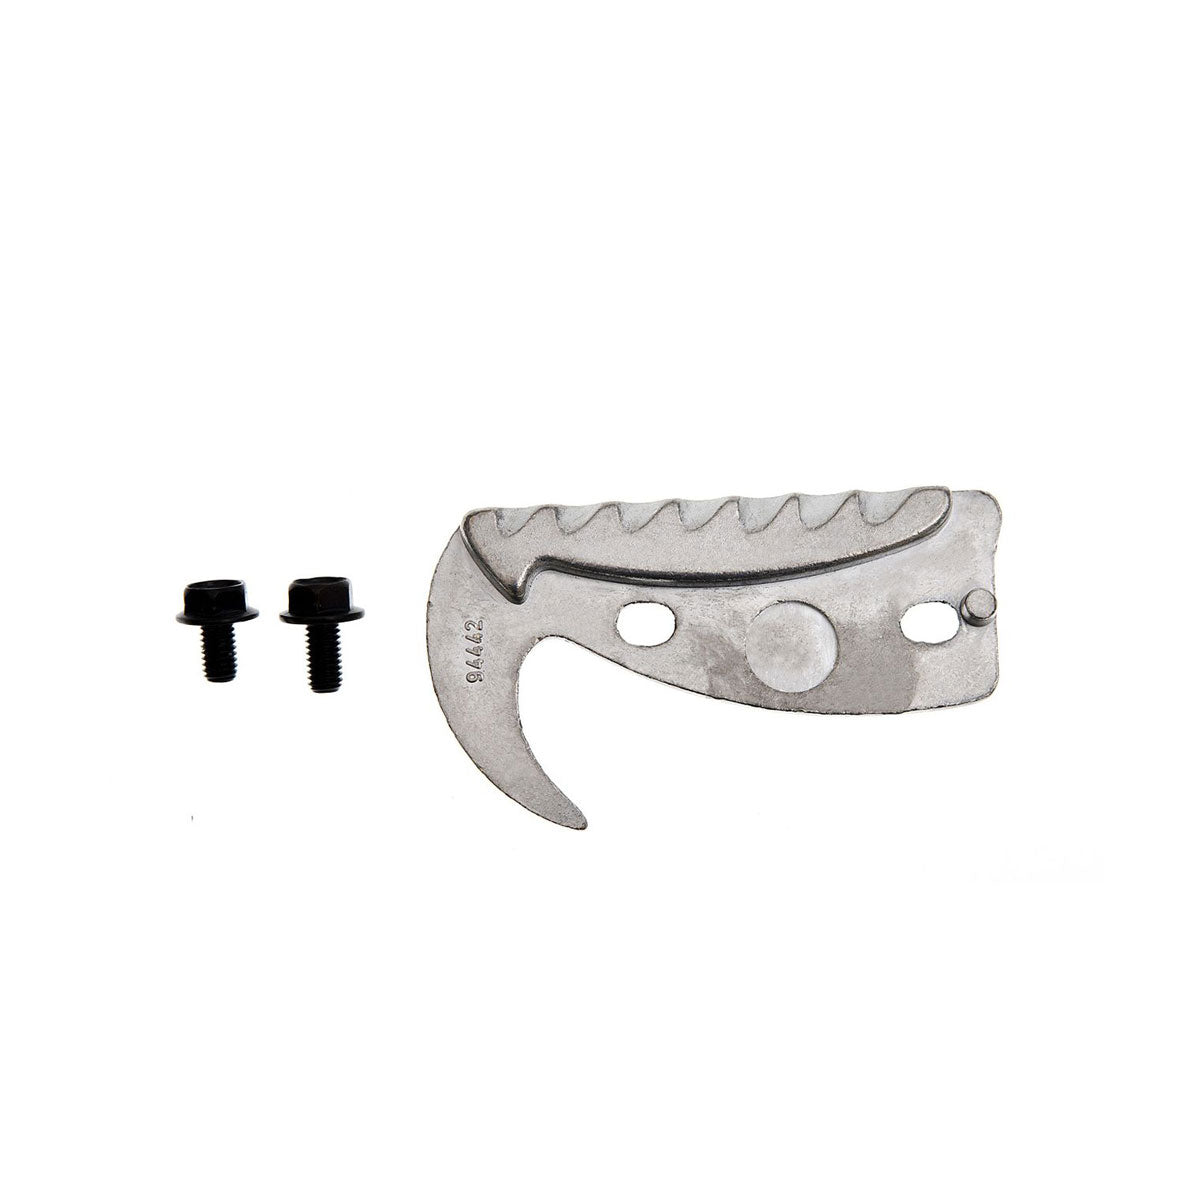 Berger 94443 Anvil with Hook for 4245, 4255